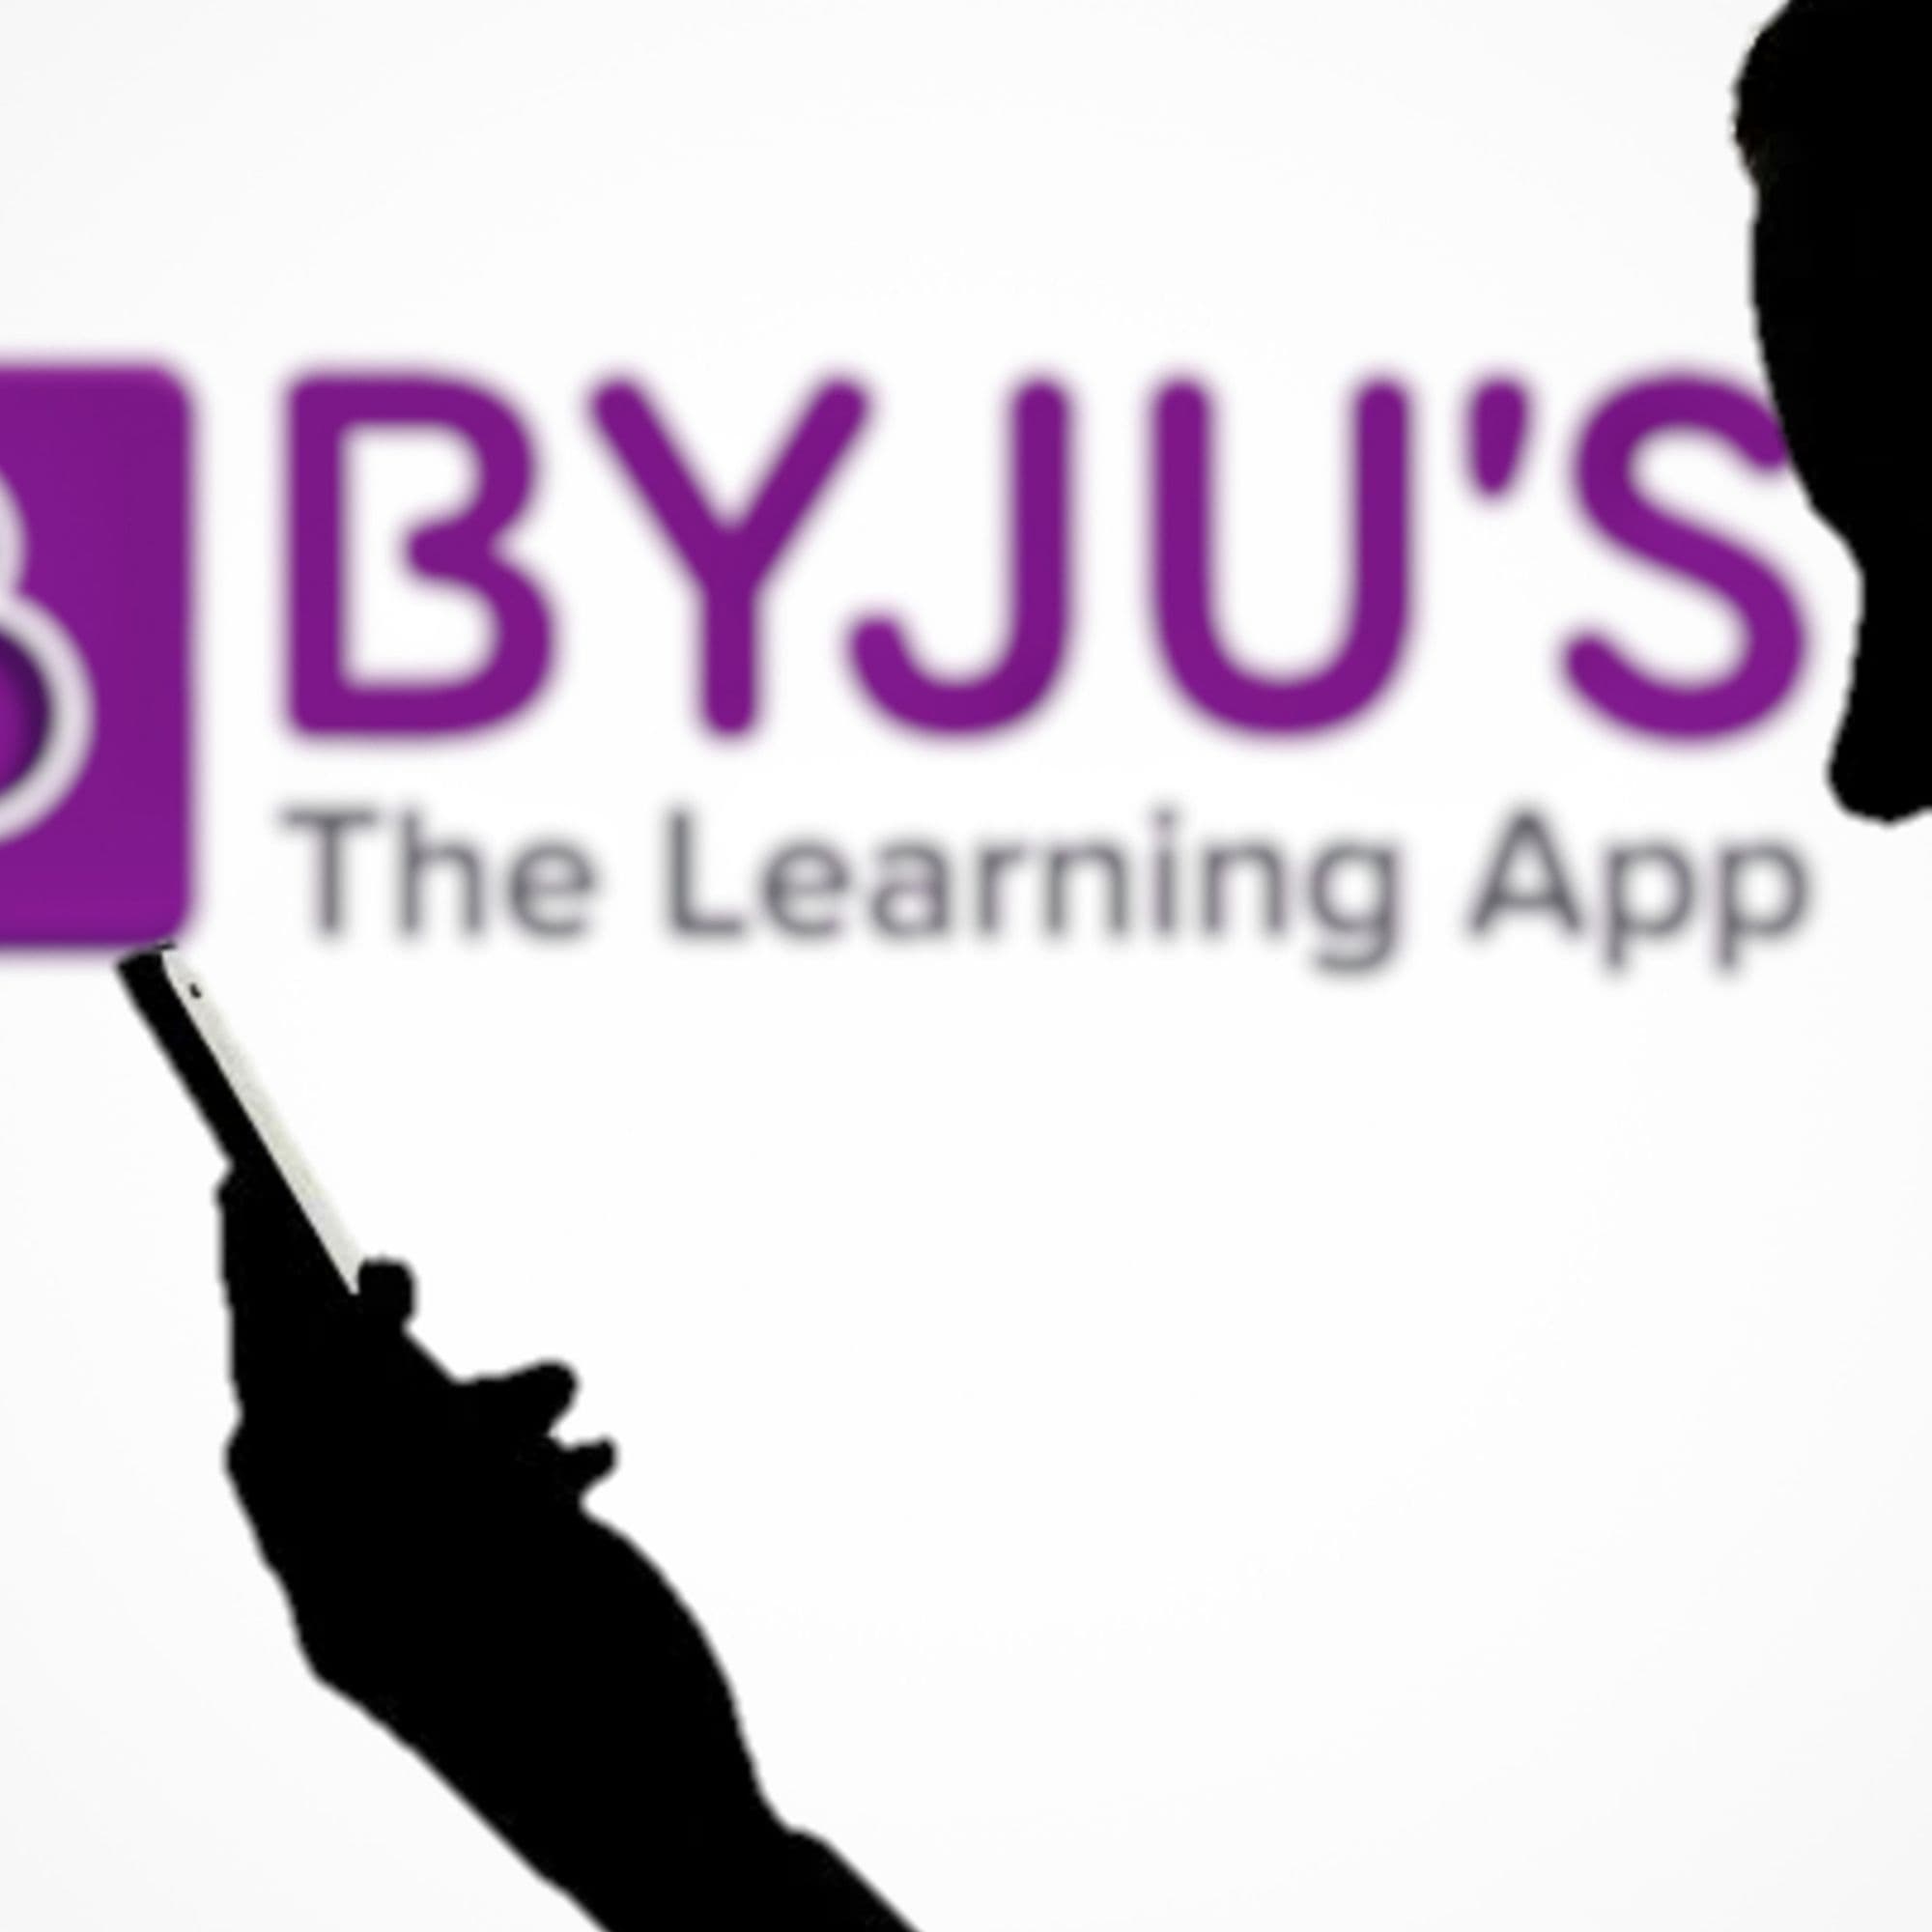 Focus on counselling rather than selling, says BYJU'S founder as edtech firm adopts new strategies